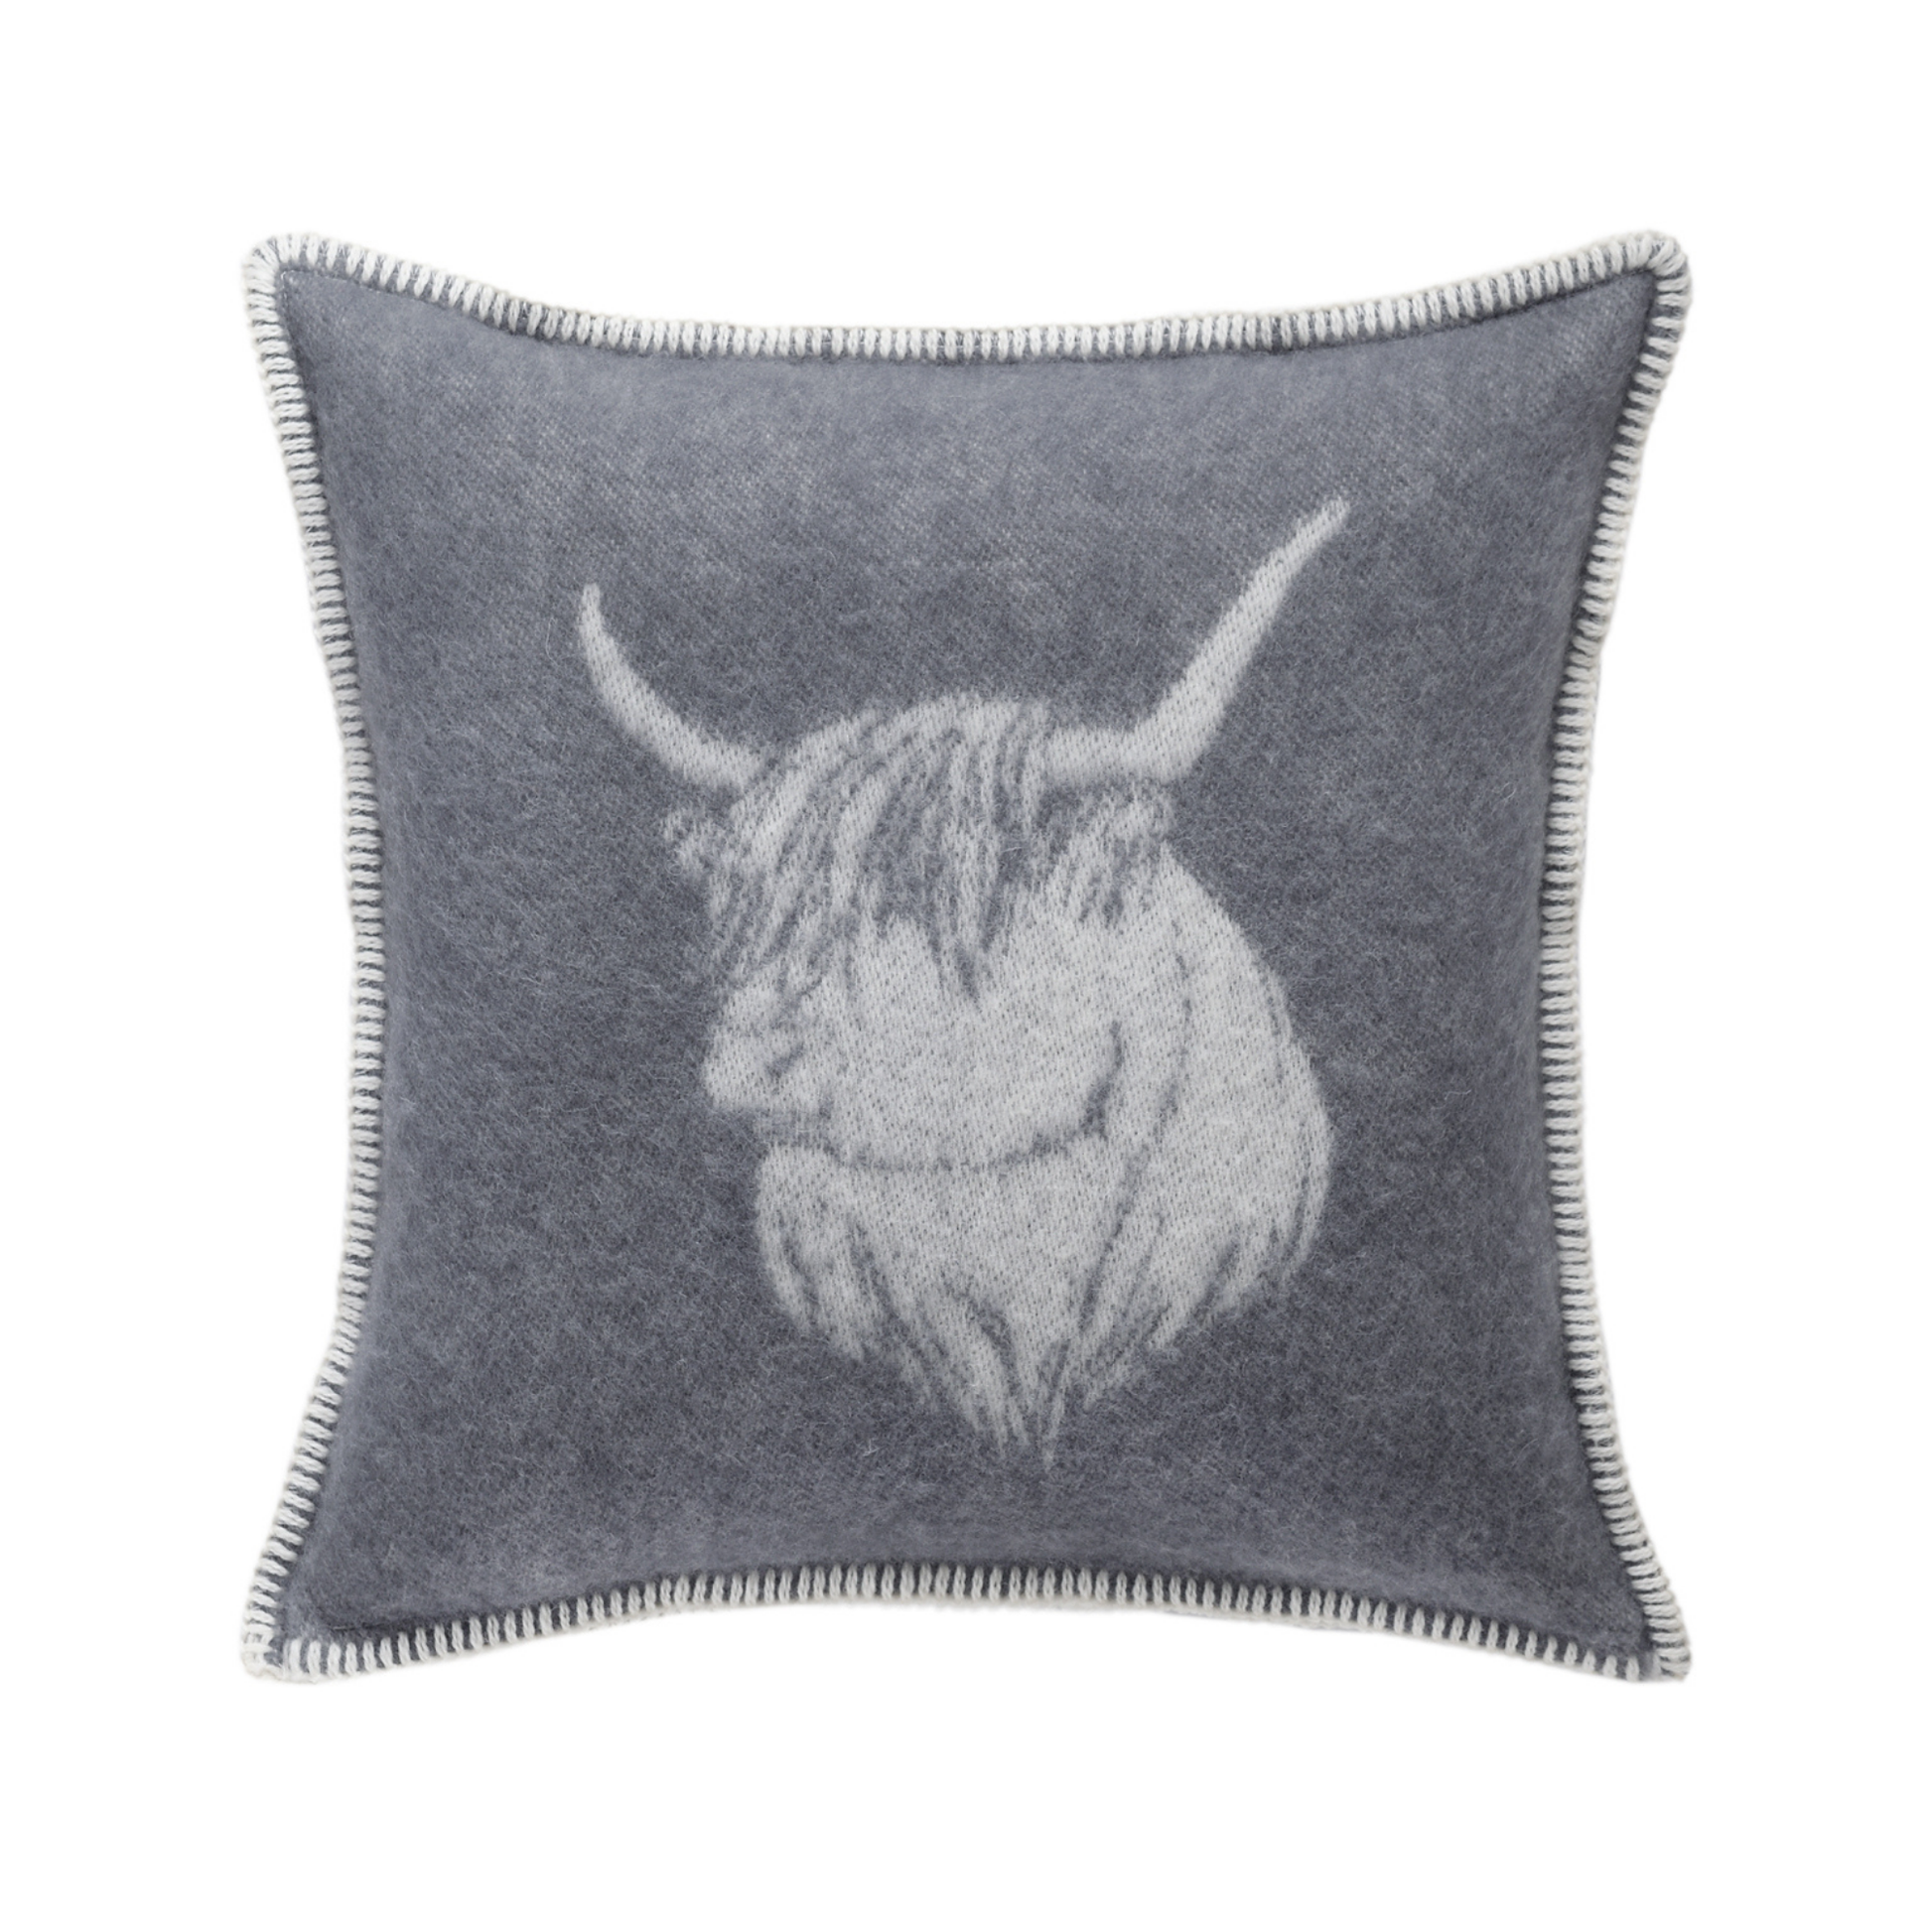 Cow cushion - cow themed gift, housewarming present, cottage living room